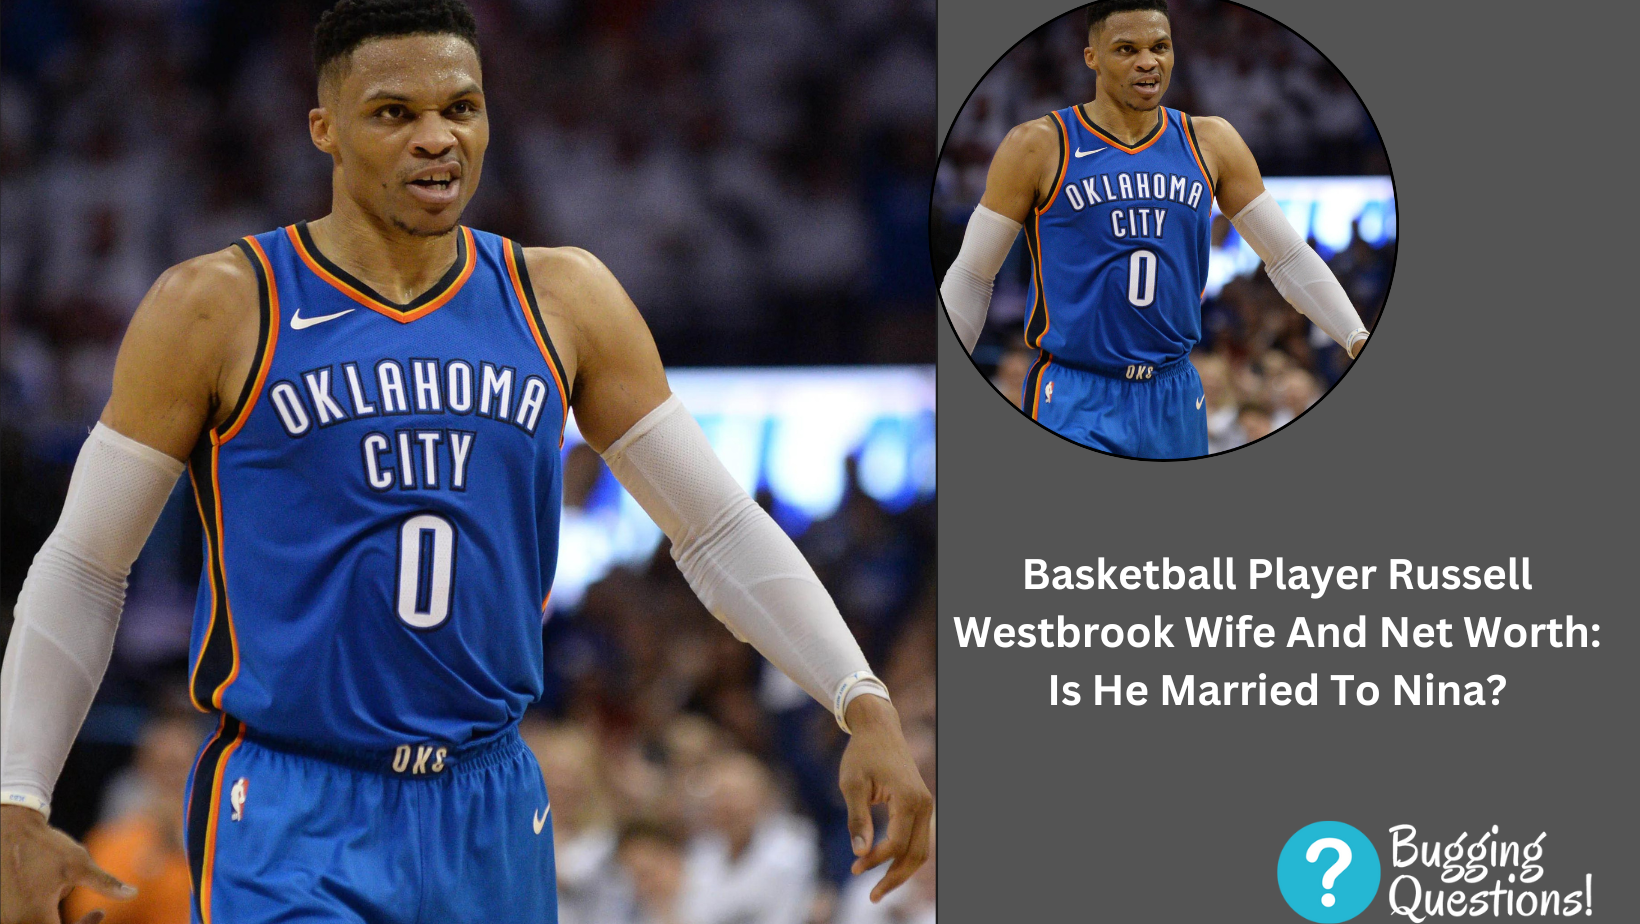 Basketball Player Russell Westbrook Wife And Net Worth